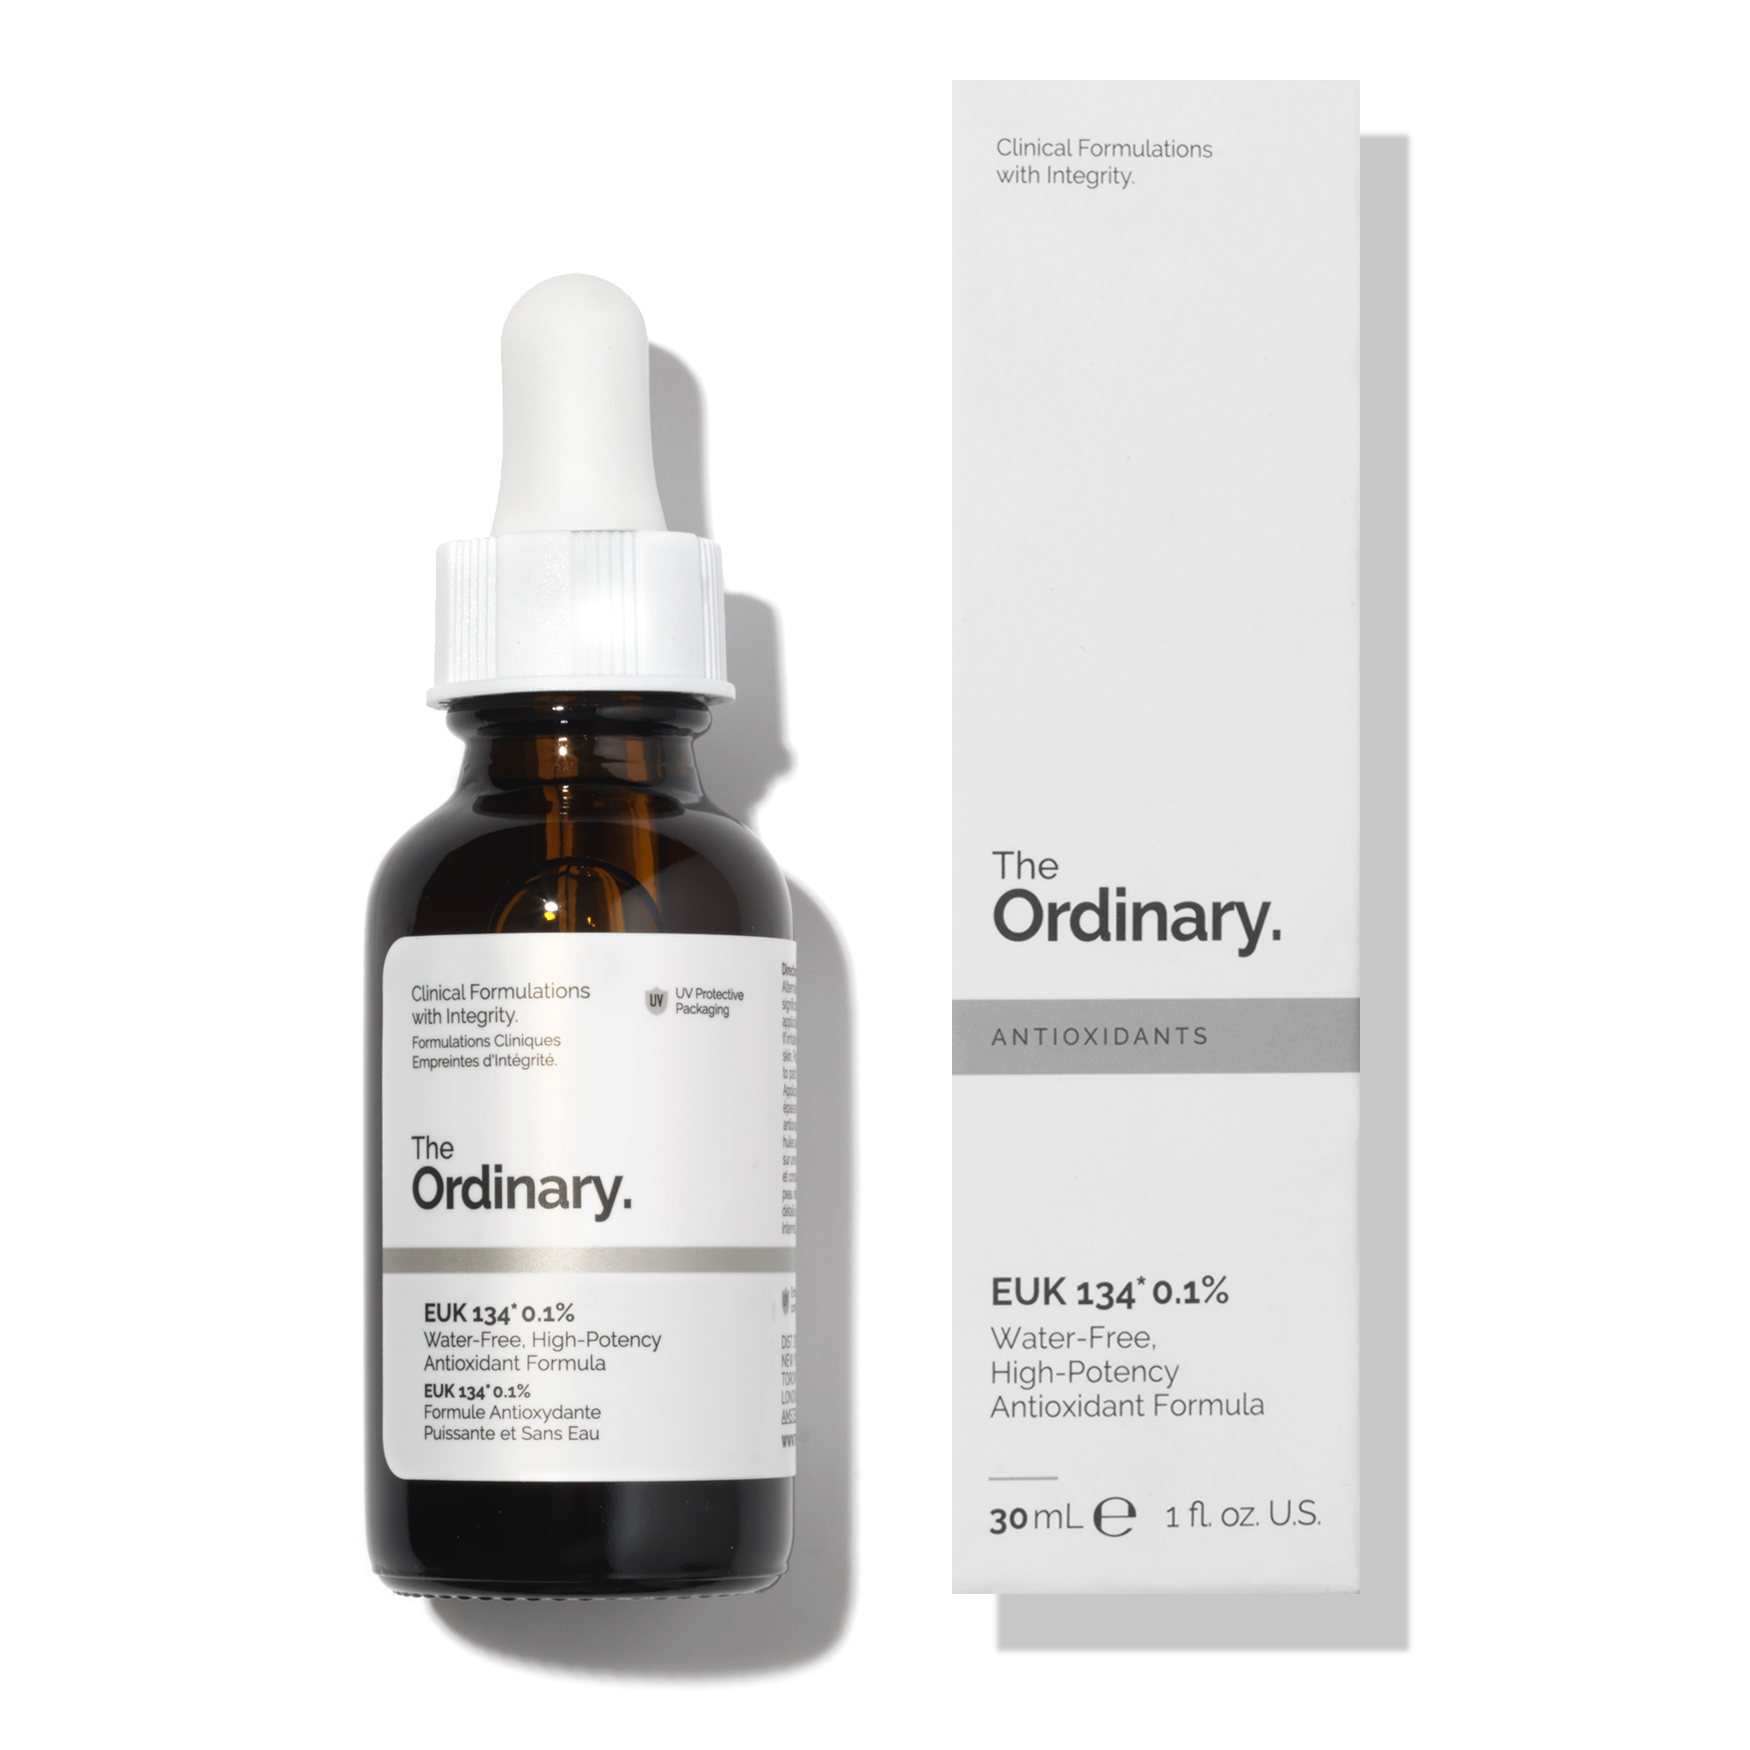 The Ordinary EUK 134 0.1% | Space NK